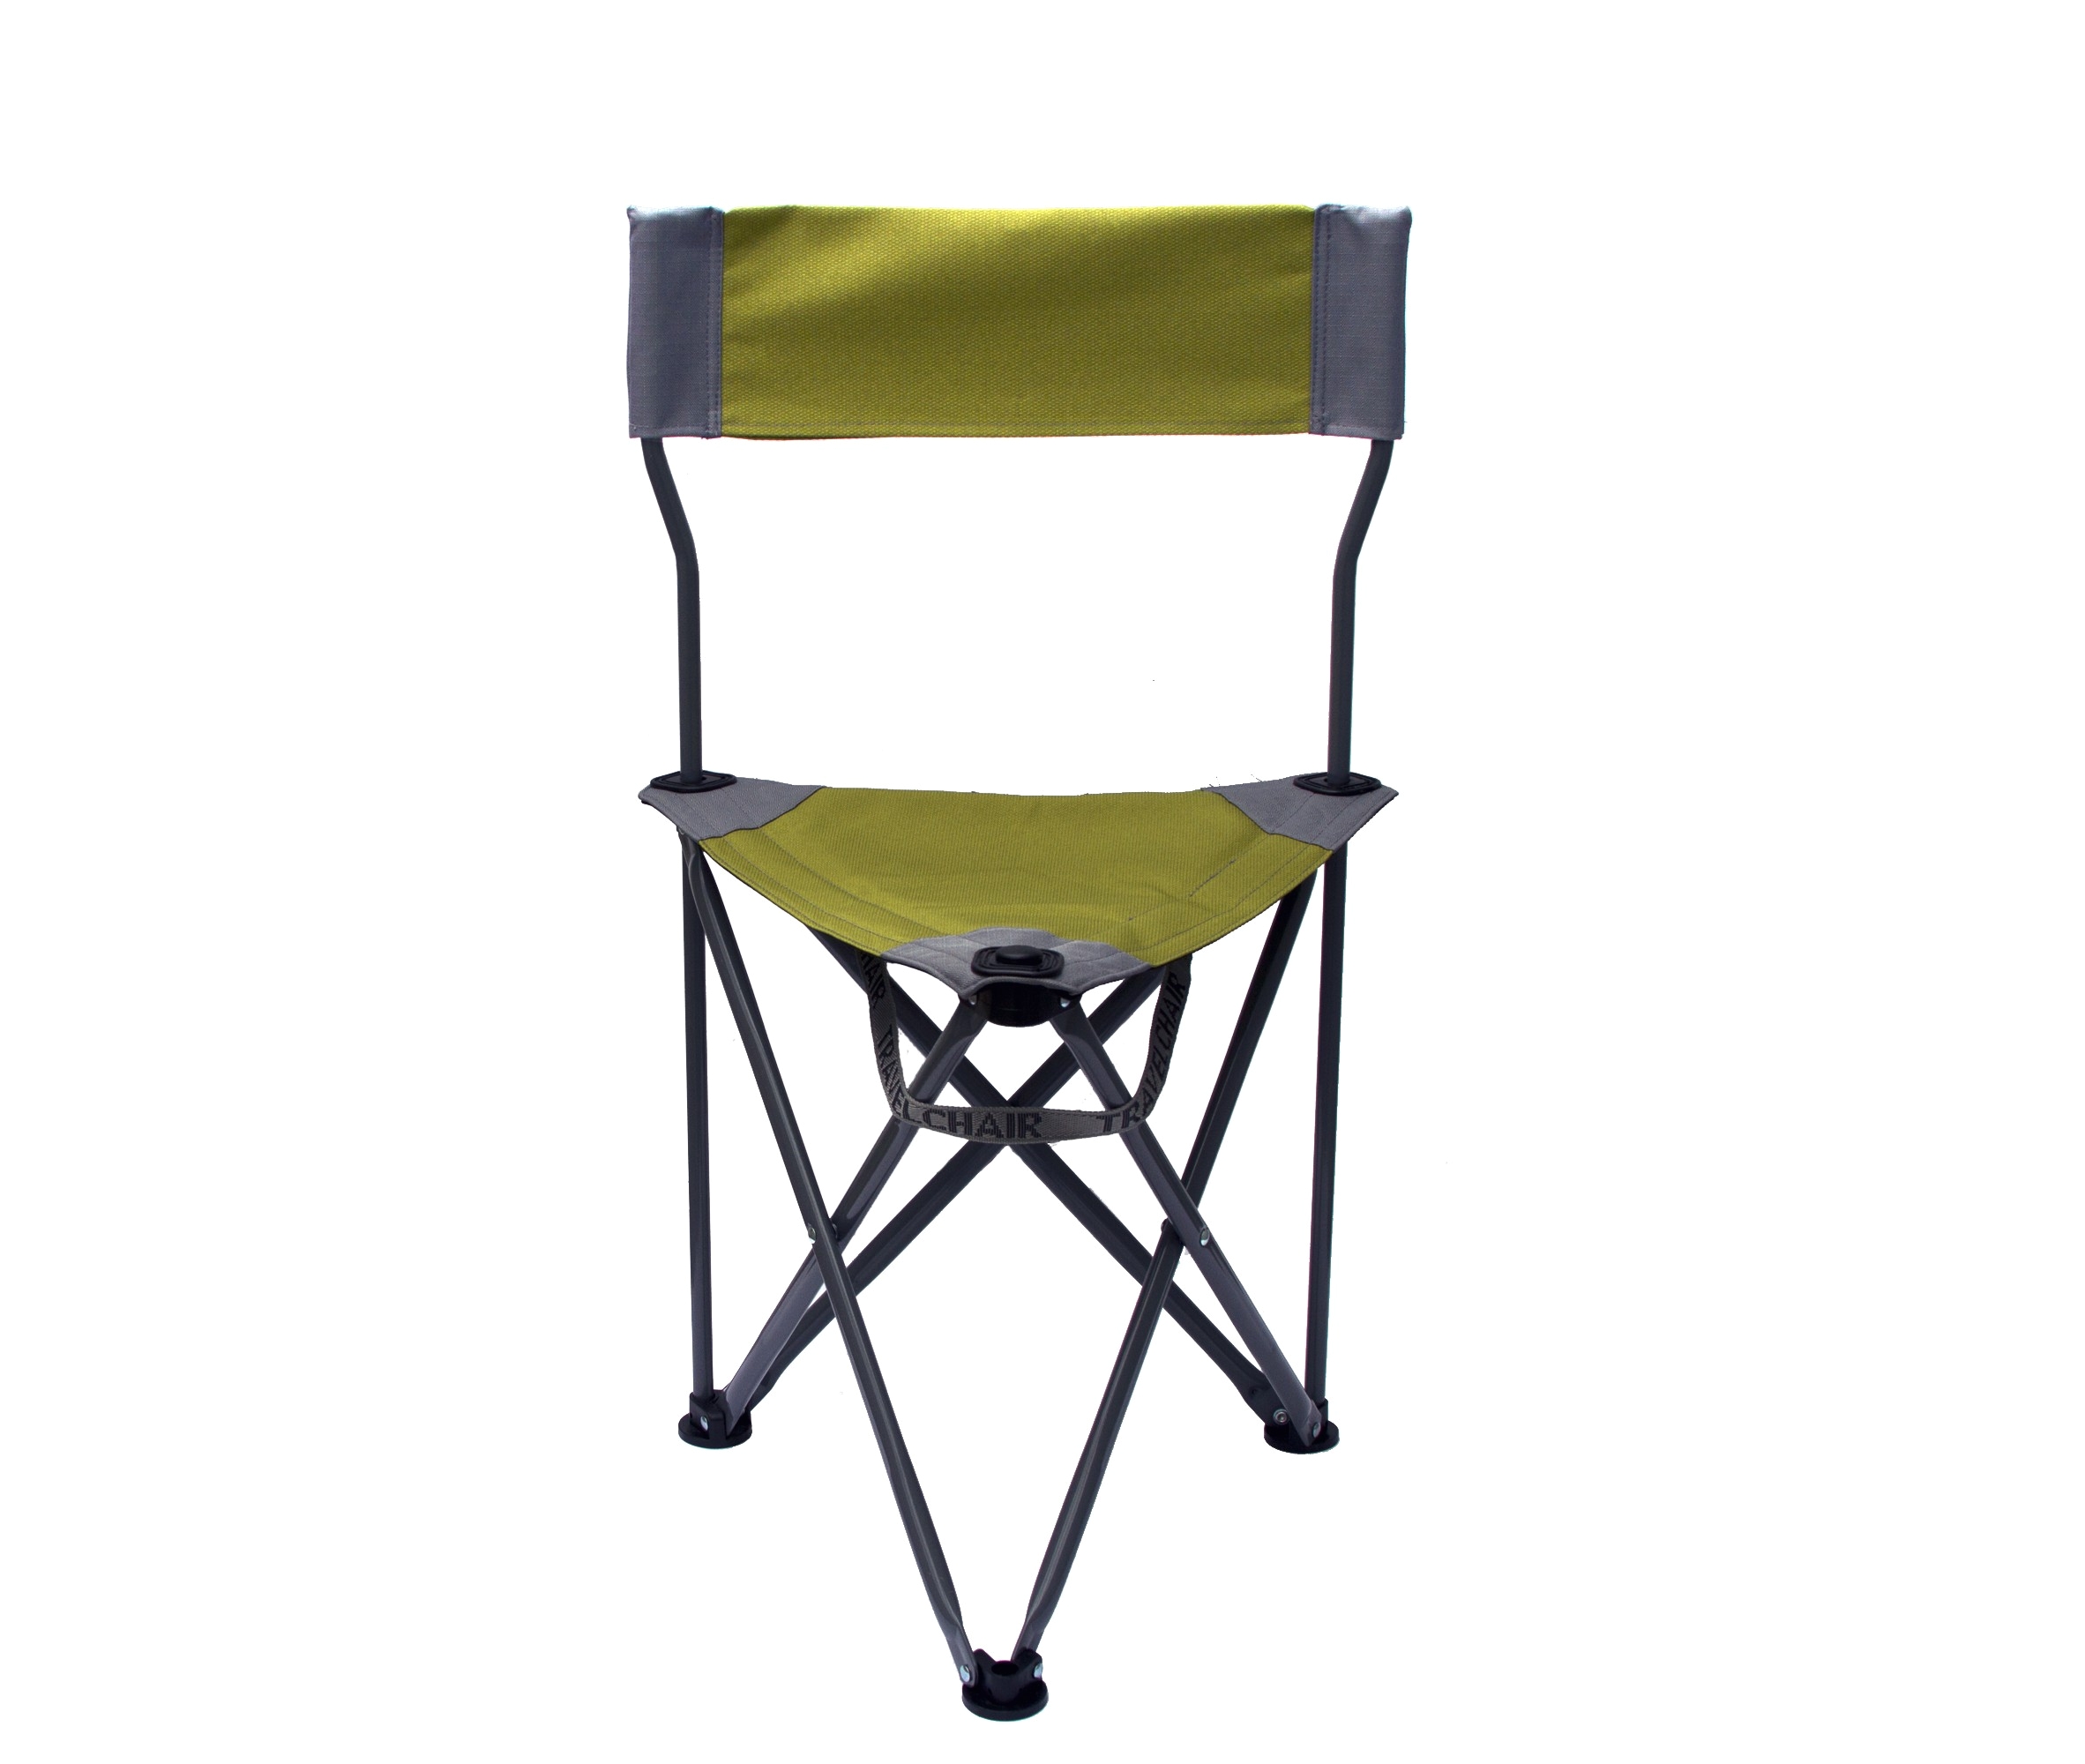 Lifetime Tables and Chairs Bulk Travelchair Ultimate Slacker 2 0 1489v2 Portable Camping Stool